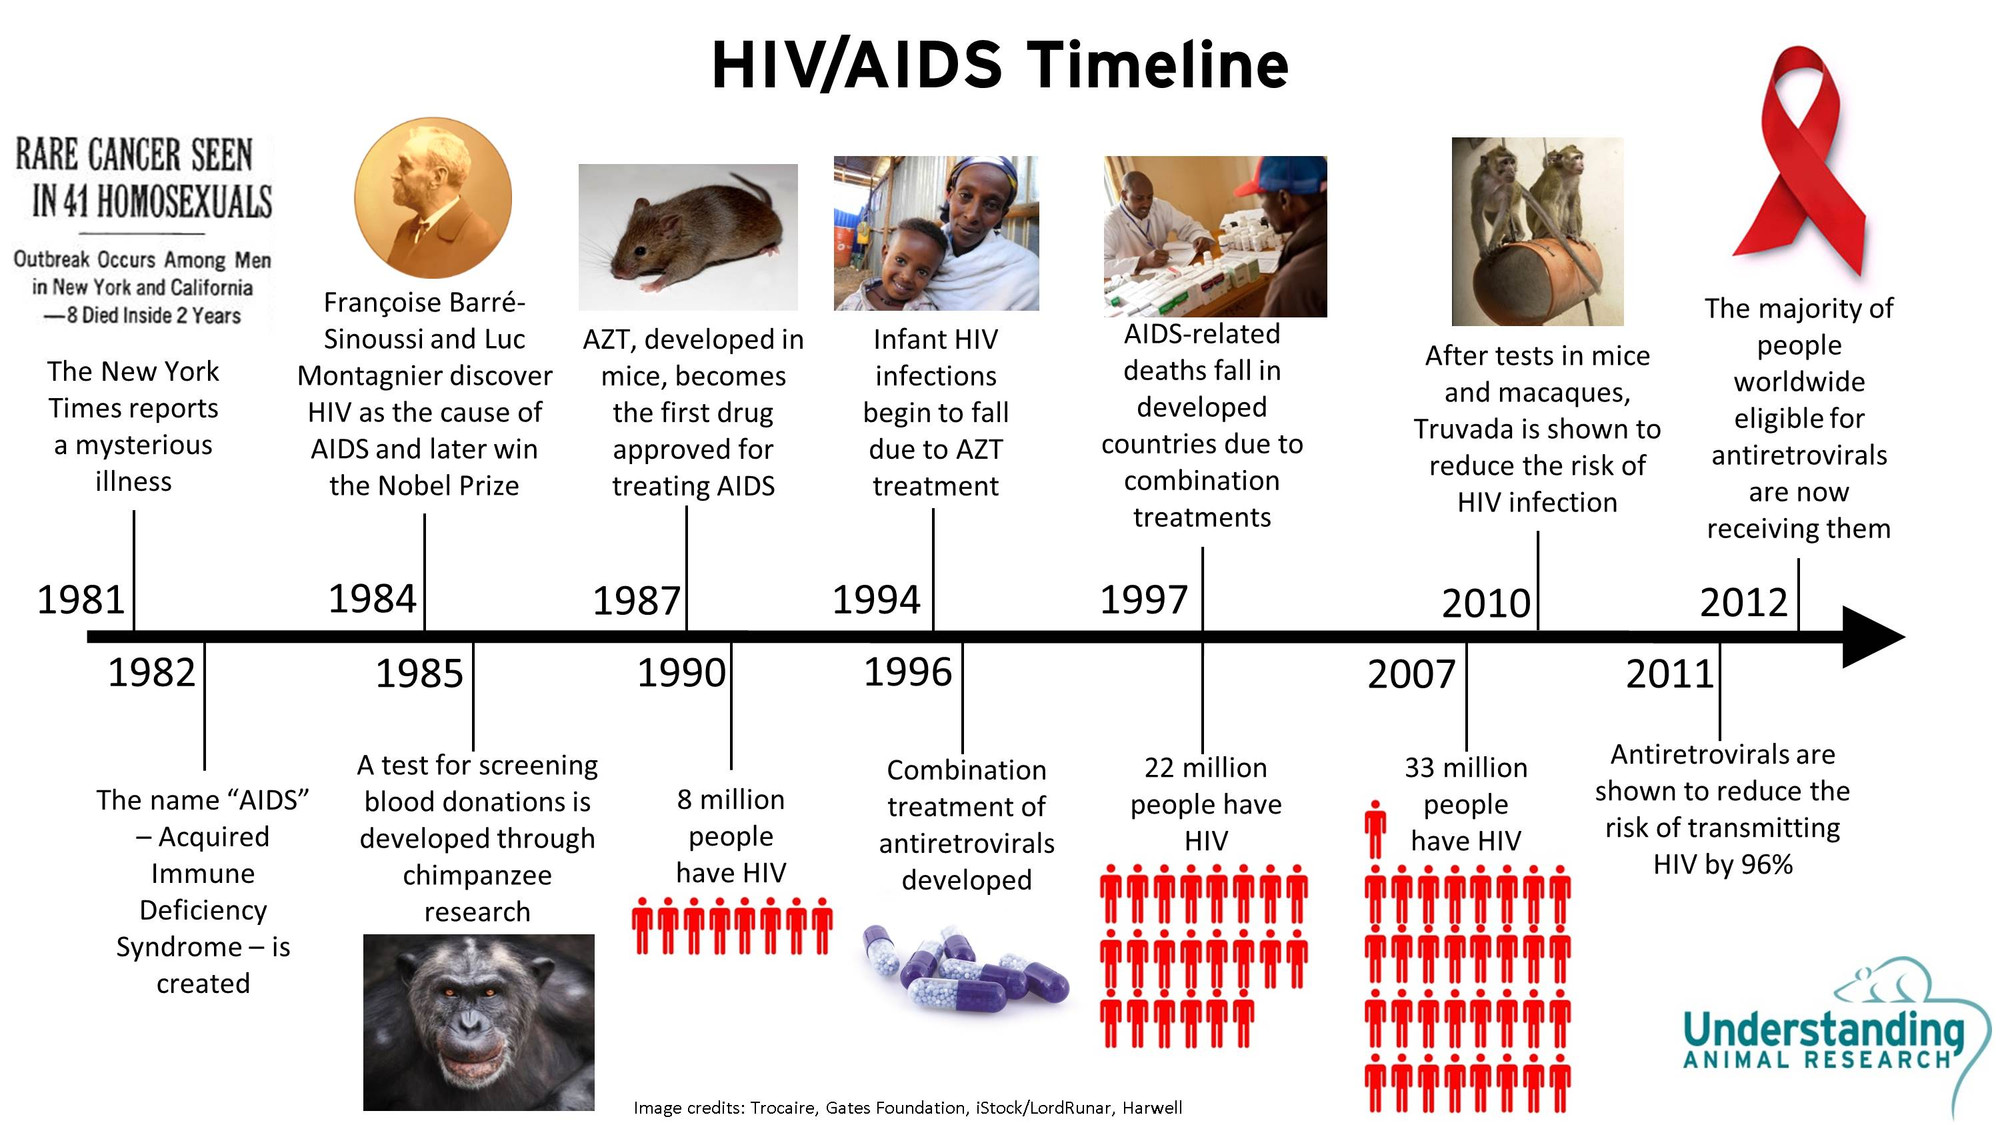 AIDS Retrospective Slideshow: A Pictorial Timeline of the HIV/AIDS Pandemic